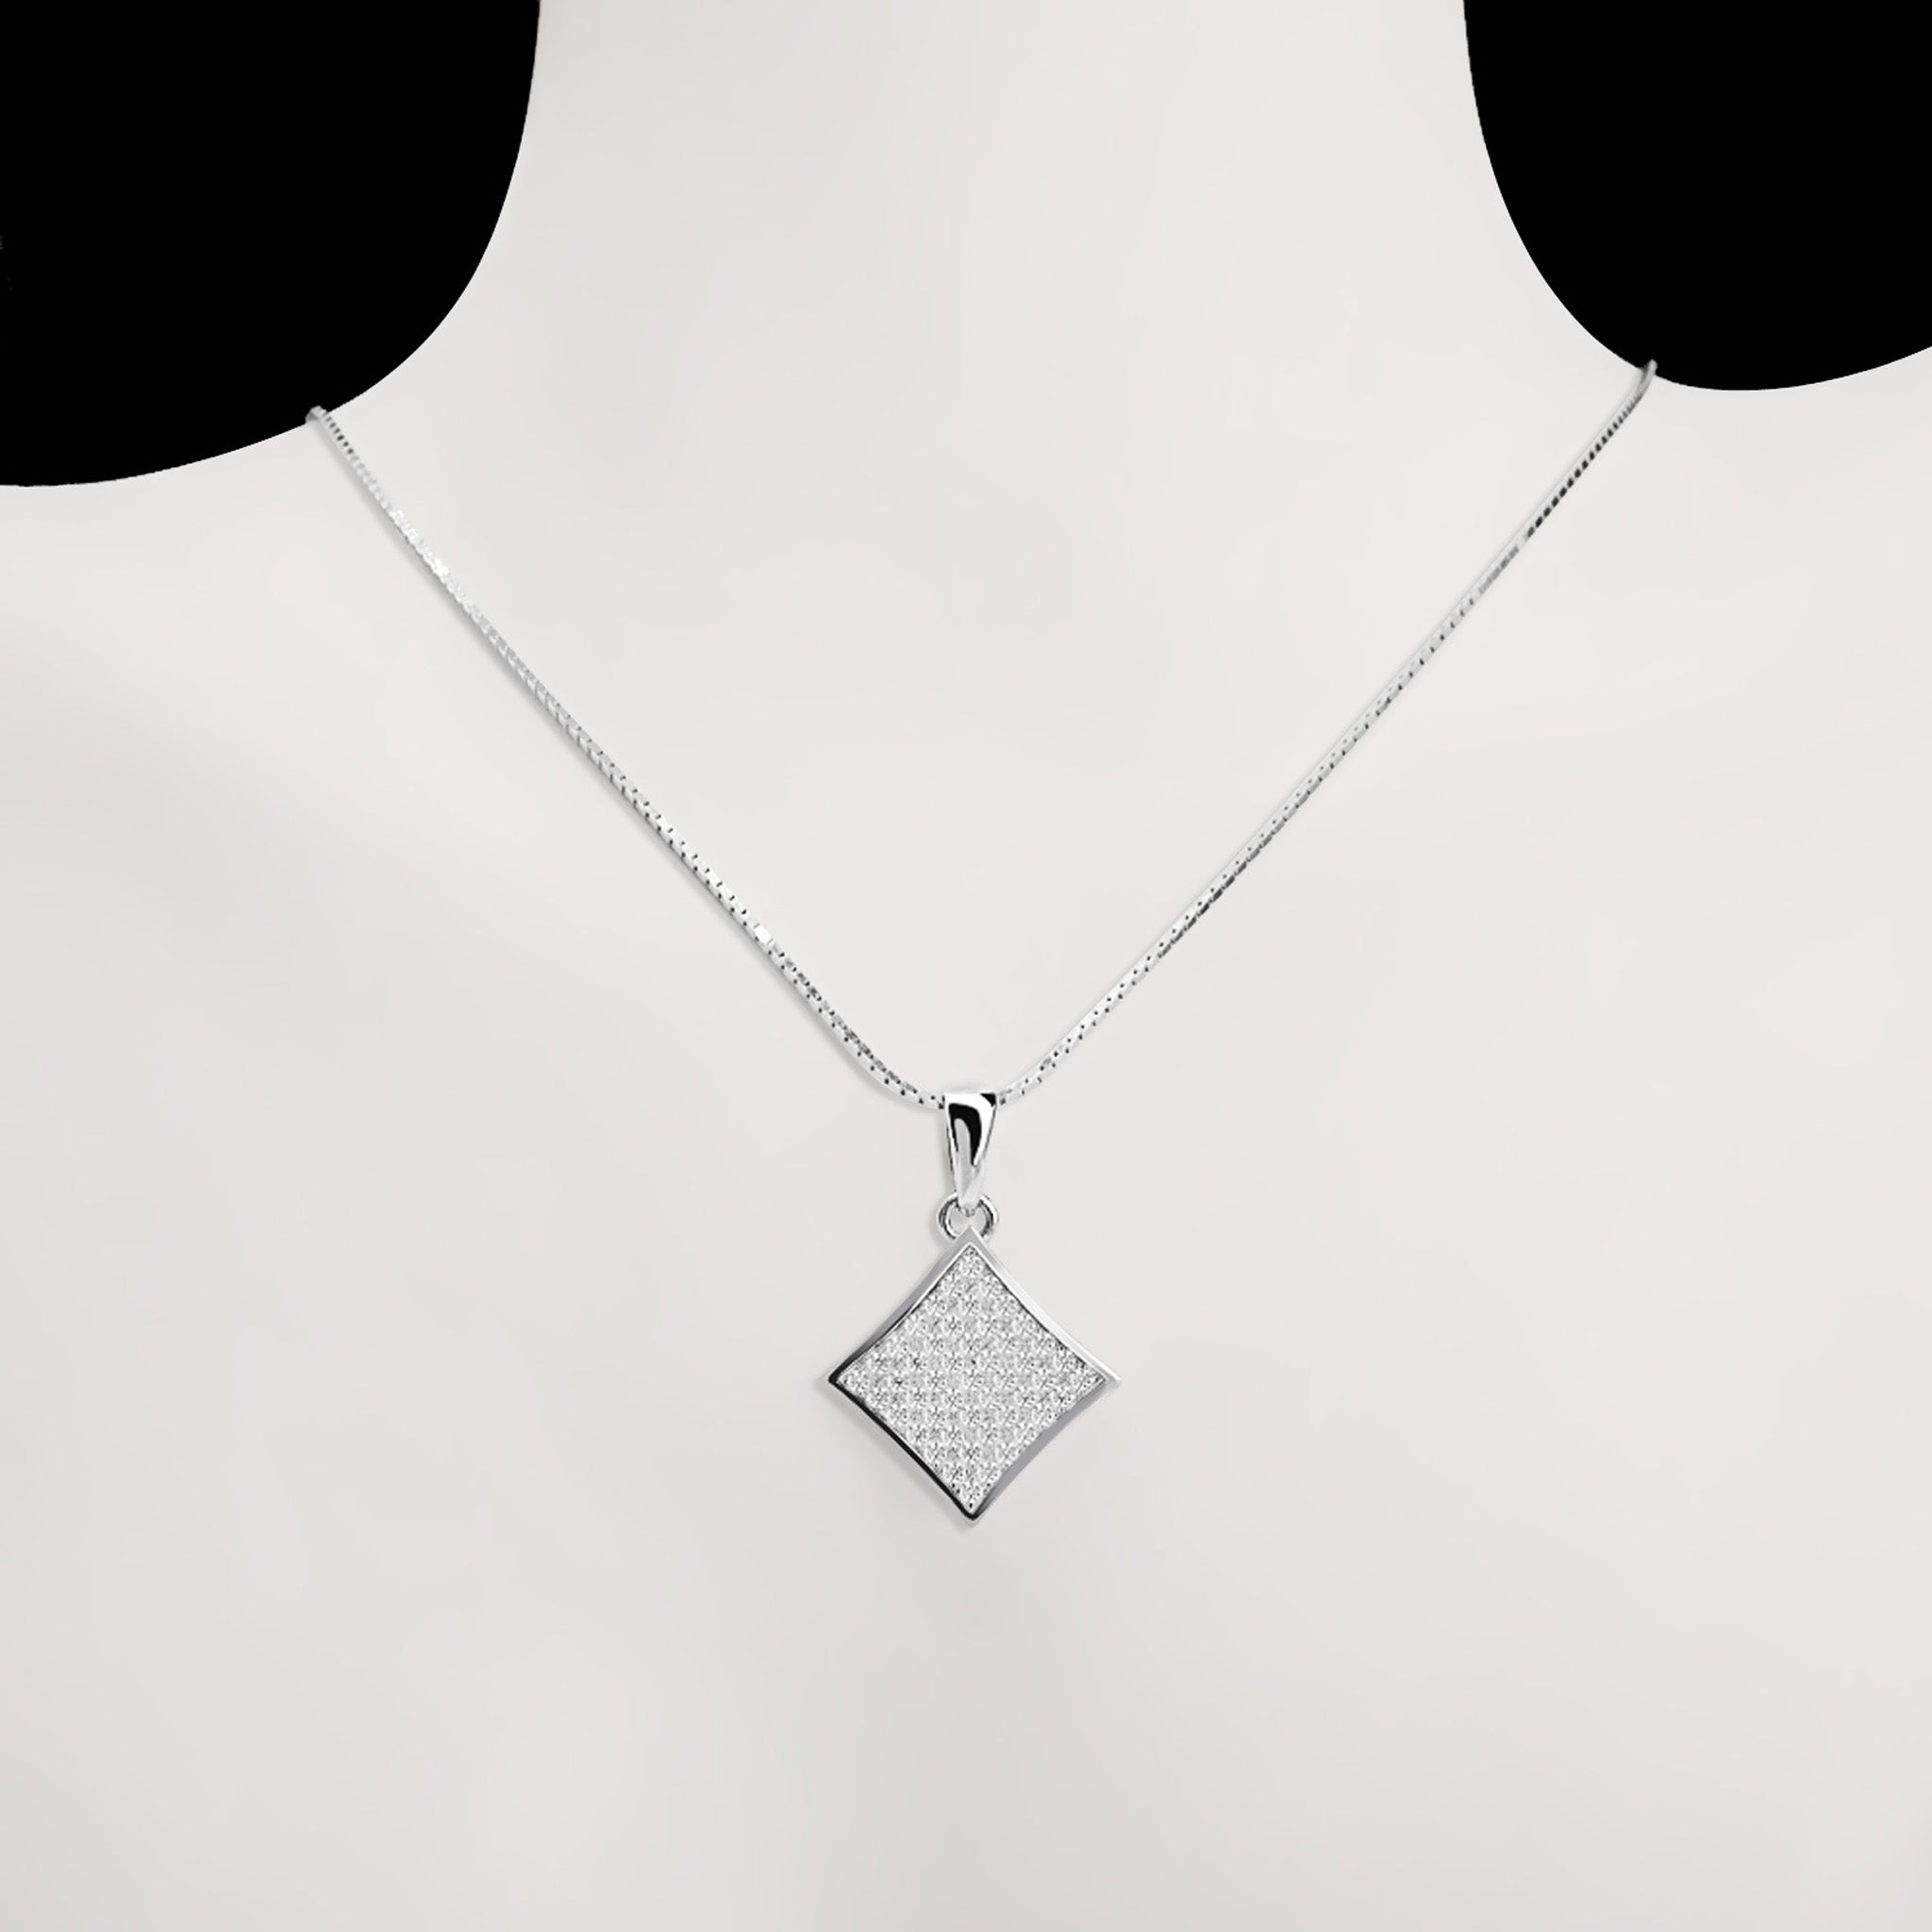 Confidence Shining Diamond Shape Ziconia Sterling Silver Necklace